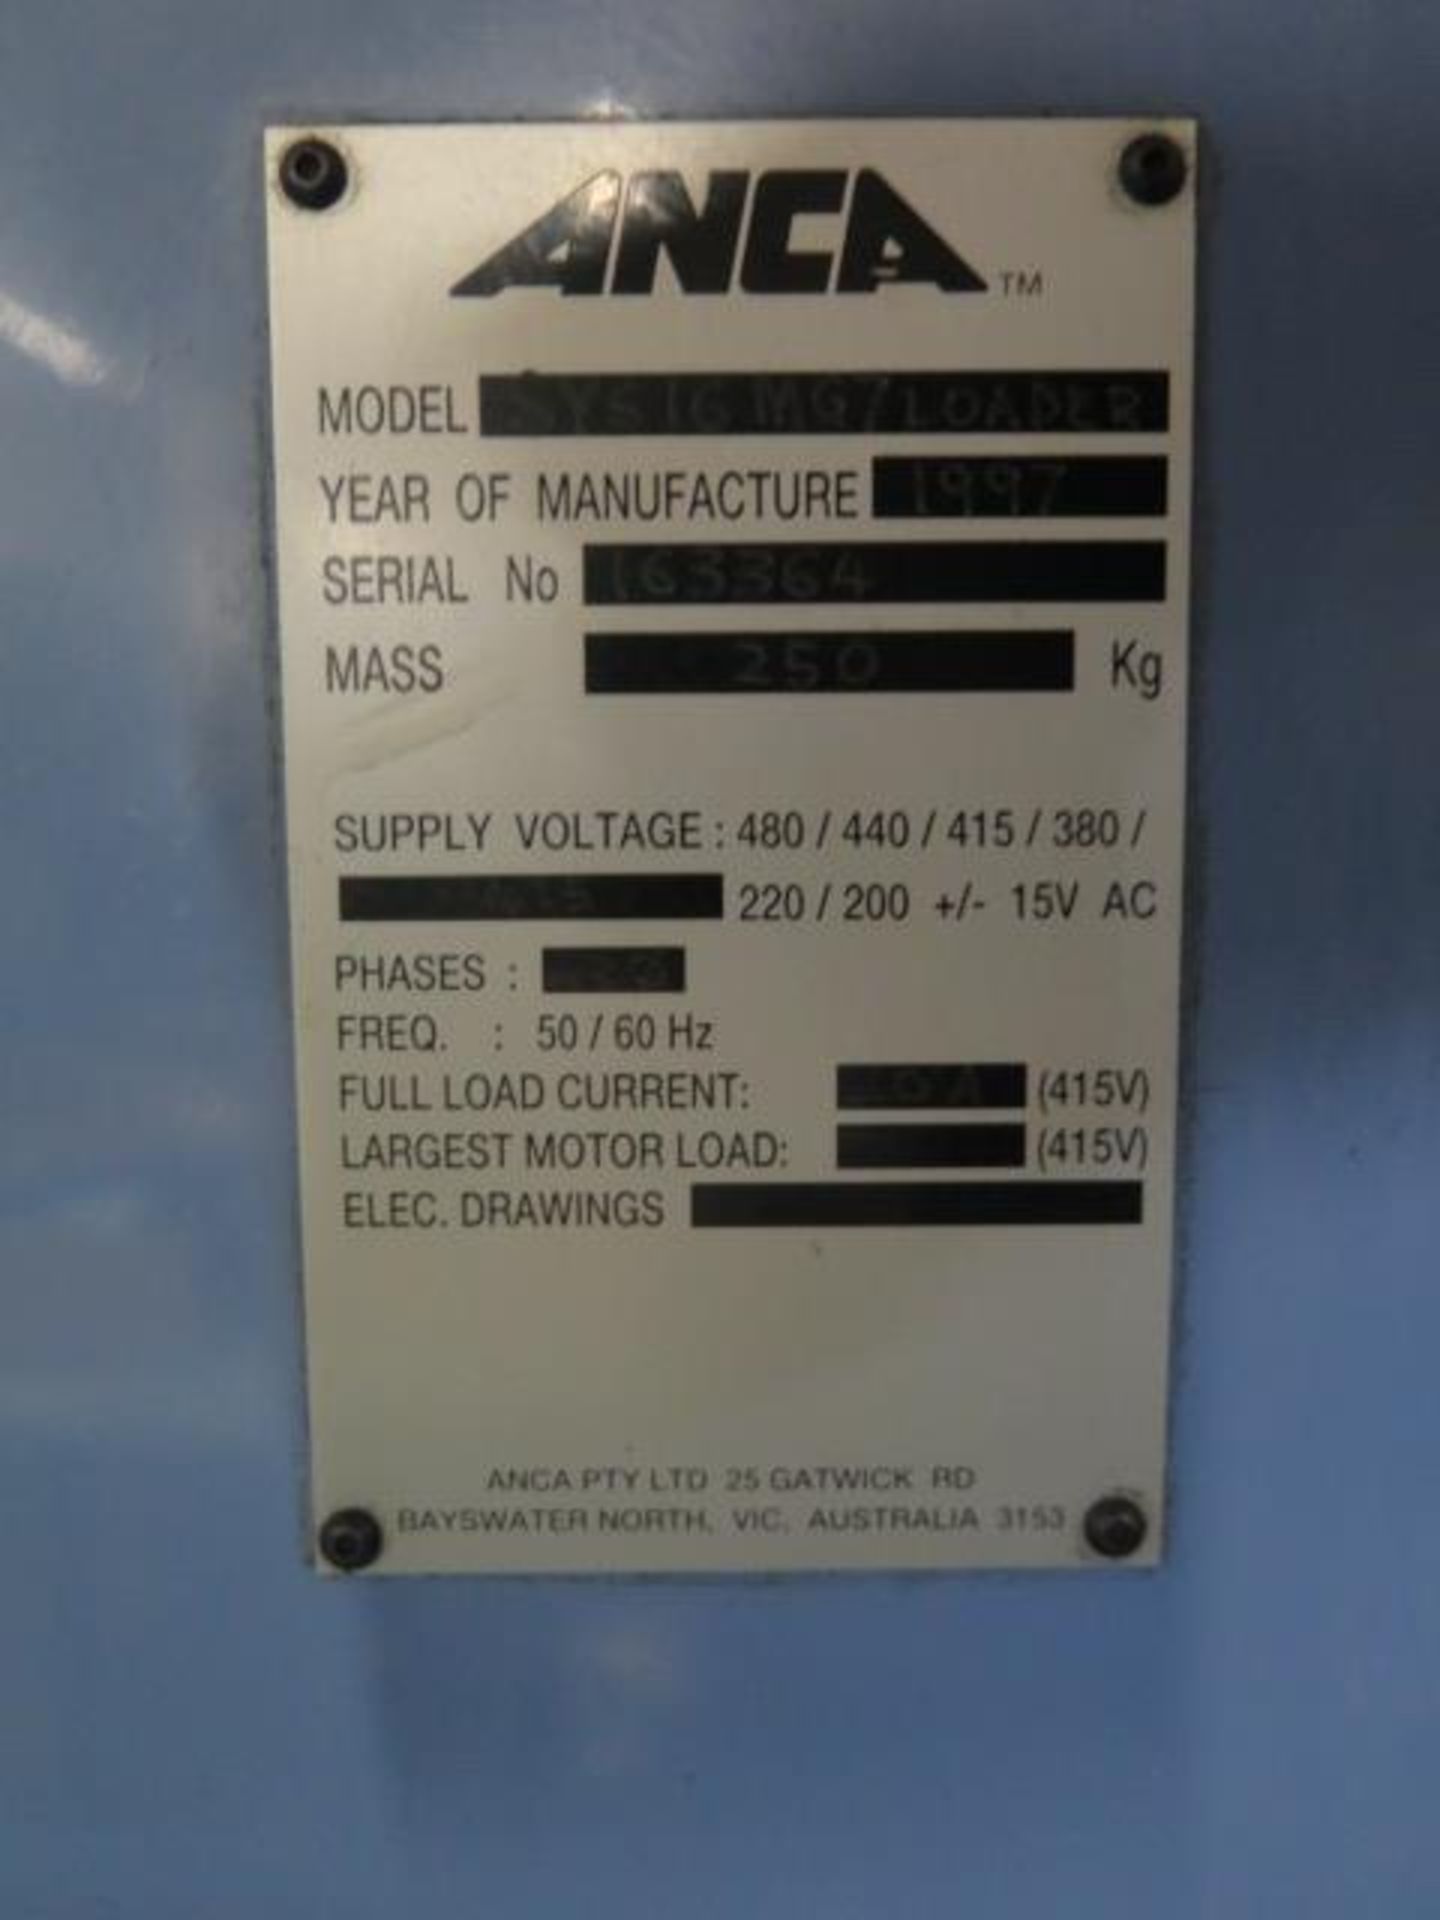 1997 Anca MG7 “Fastgrind” 7-Axis CNC Tool & Cutter Grinder w/ Anca Controls, Steady Rest, SOLD AS IS - Image 21 of 21